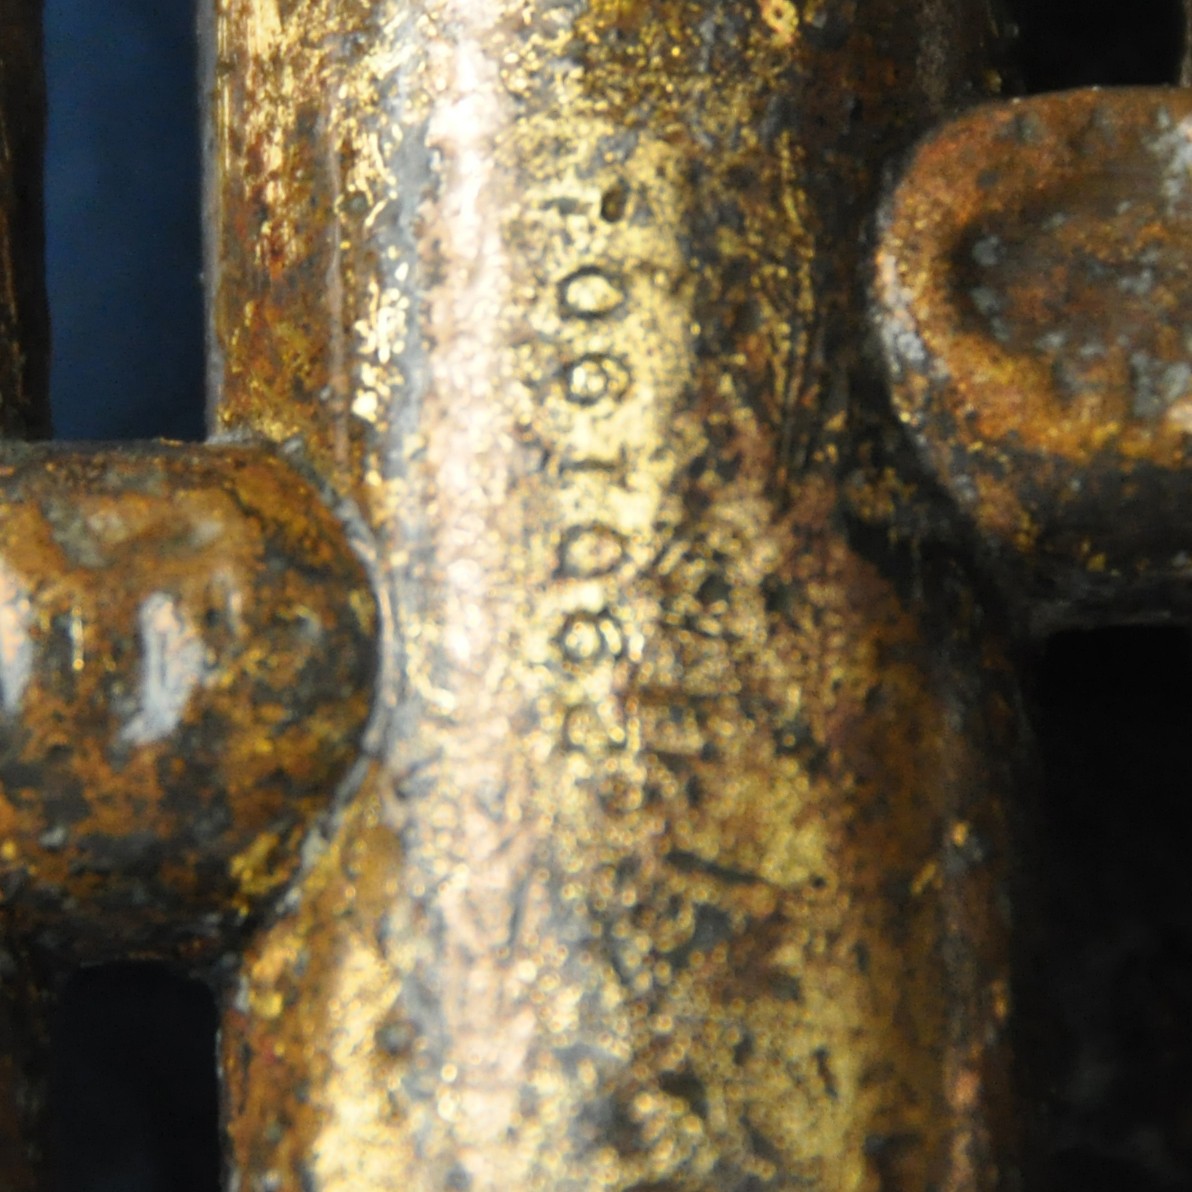 <p>Close up of USS <i>Houston</i> trumpet second valve with the numbers &quot;290190&quot; engraved into the valvue</p>
